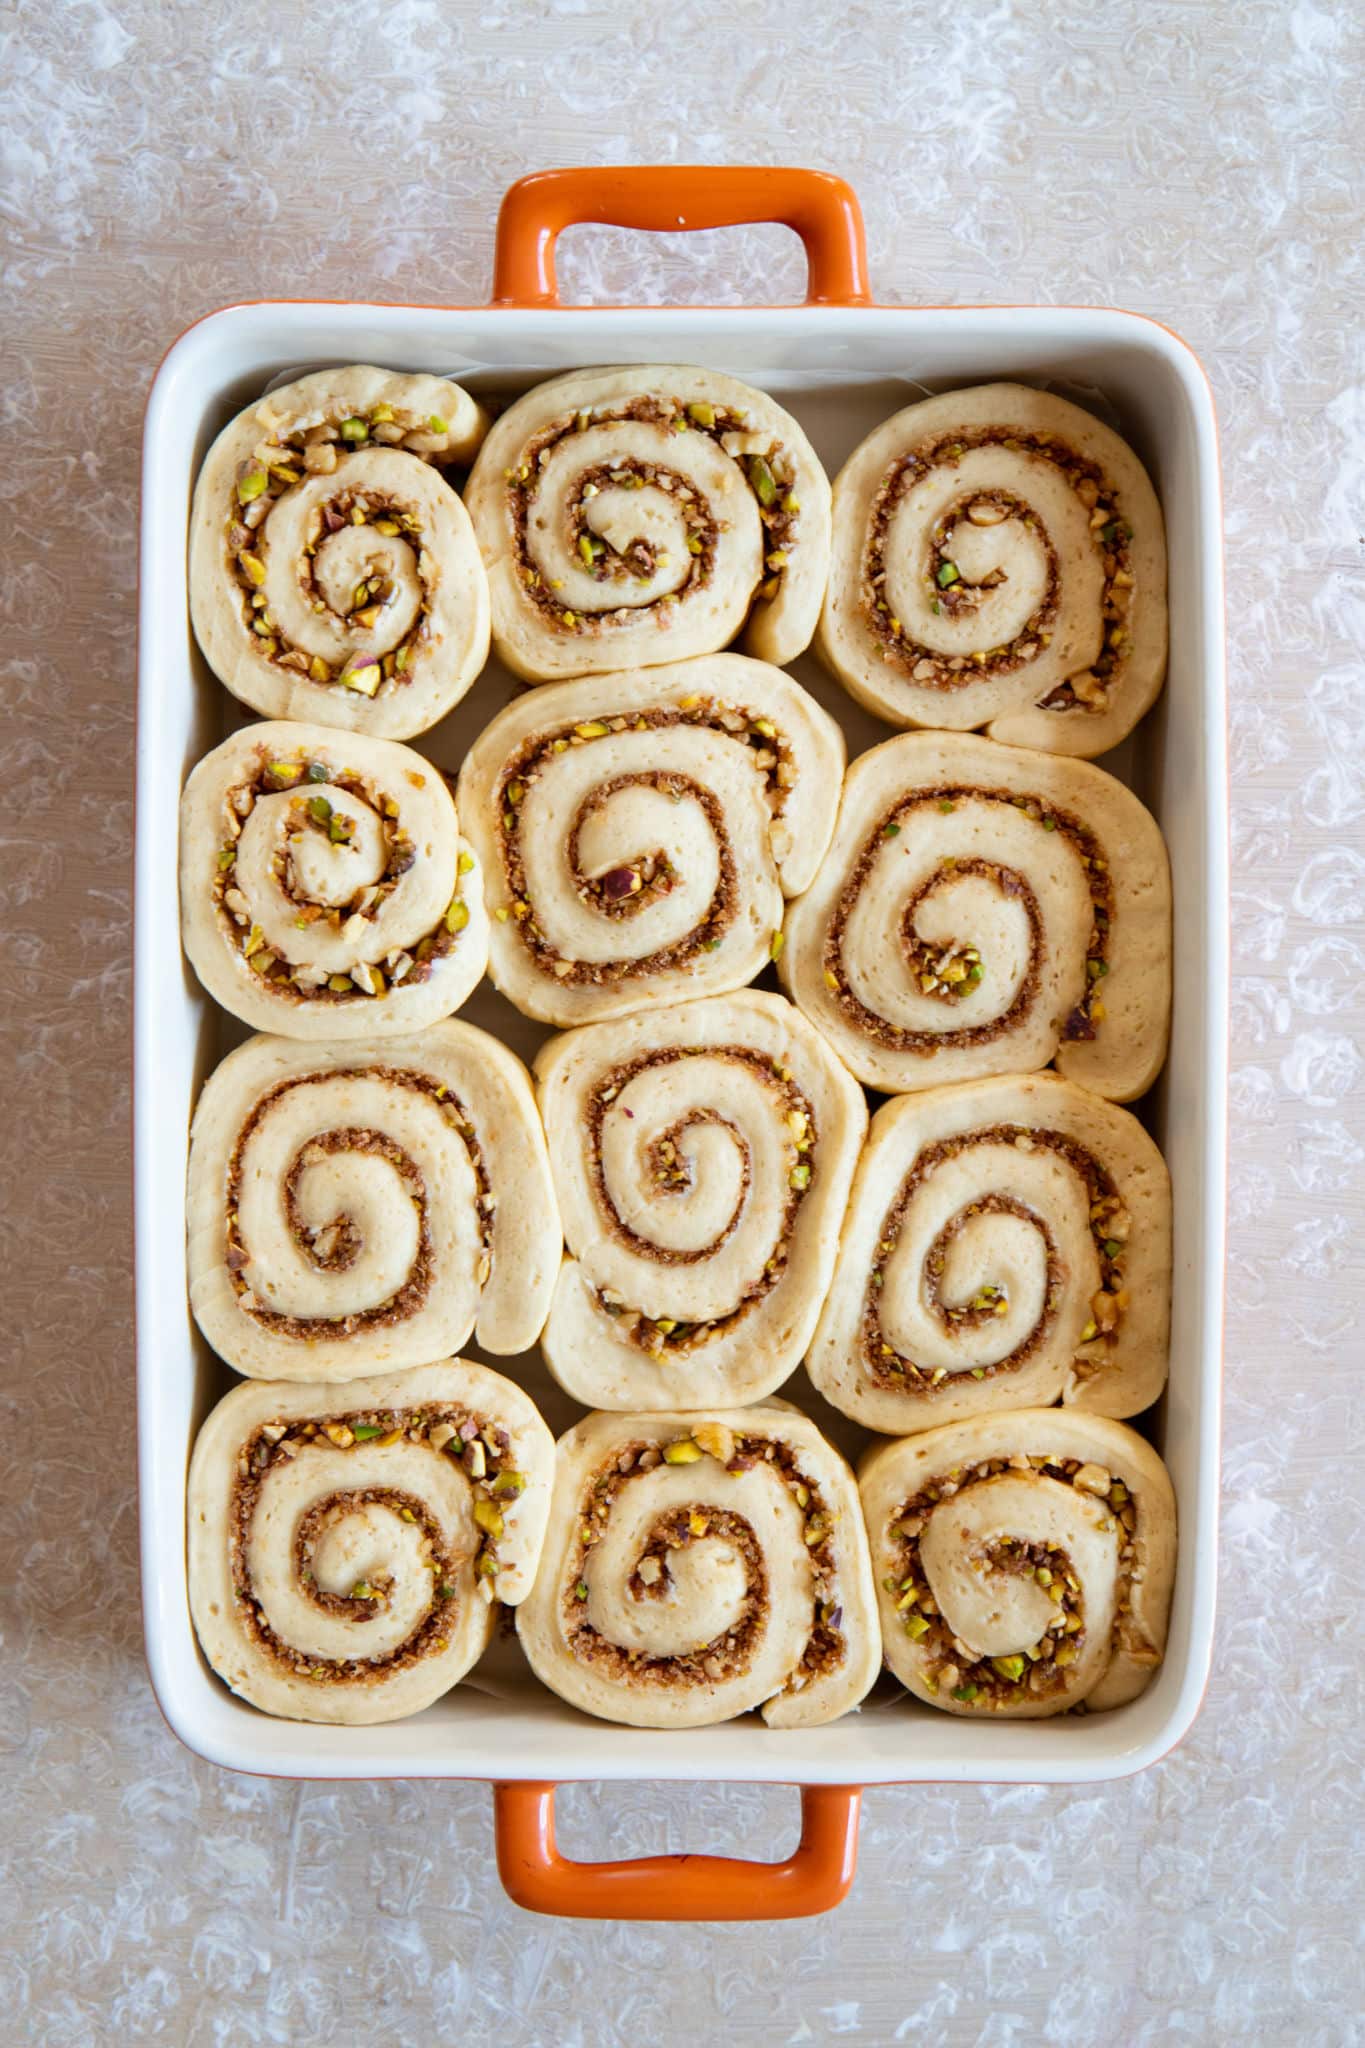 Top-down view of the cinnamon rolls before baking.